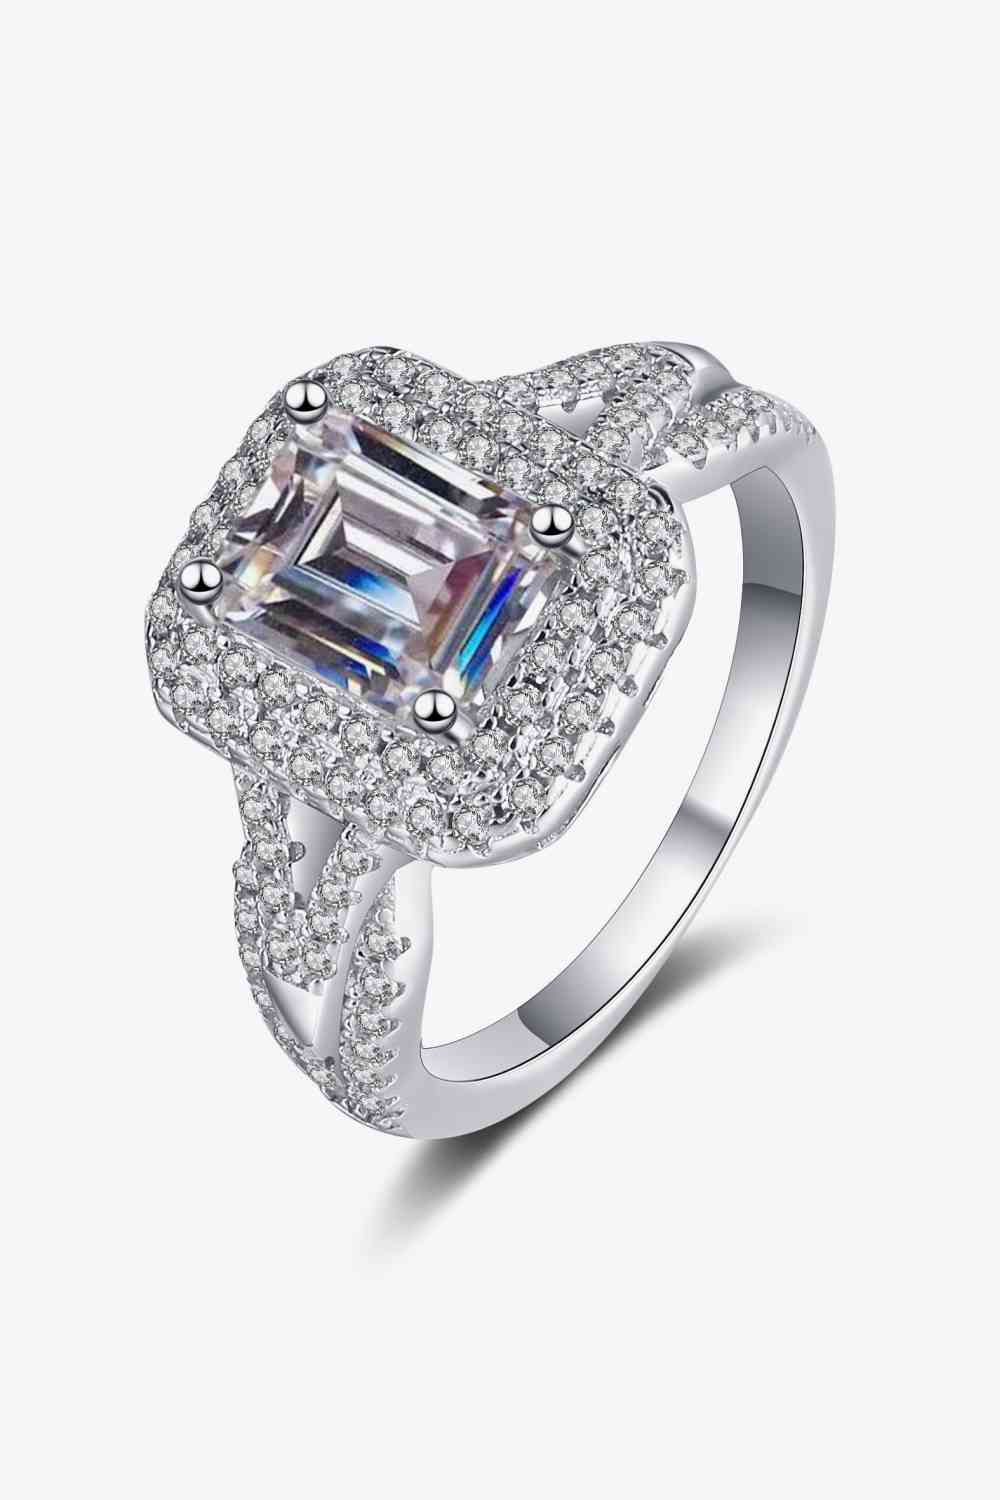 a white gold ring with a square cut diamond surrounded by diamonds